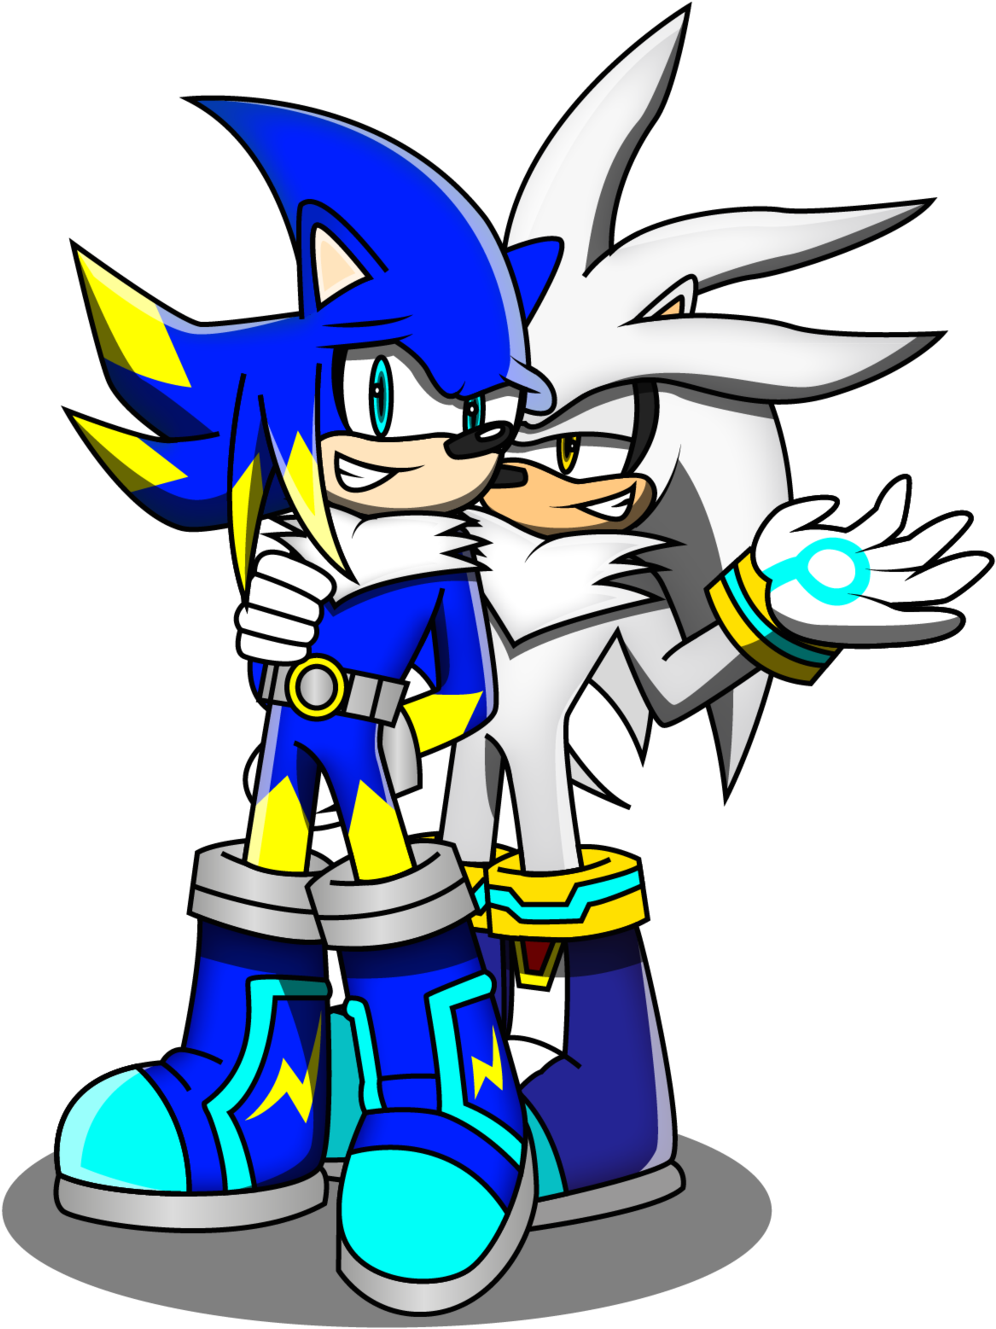 Or Jolt And Silver The Hedgehog By Arung98 - Silver The Hedgehog (1024x1449)